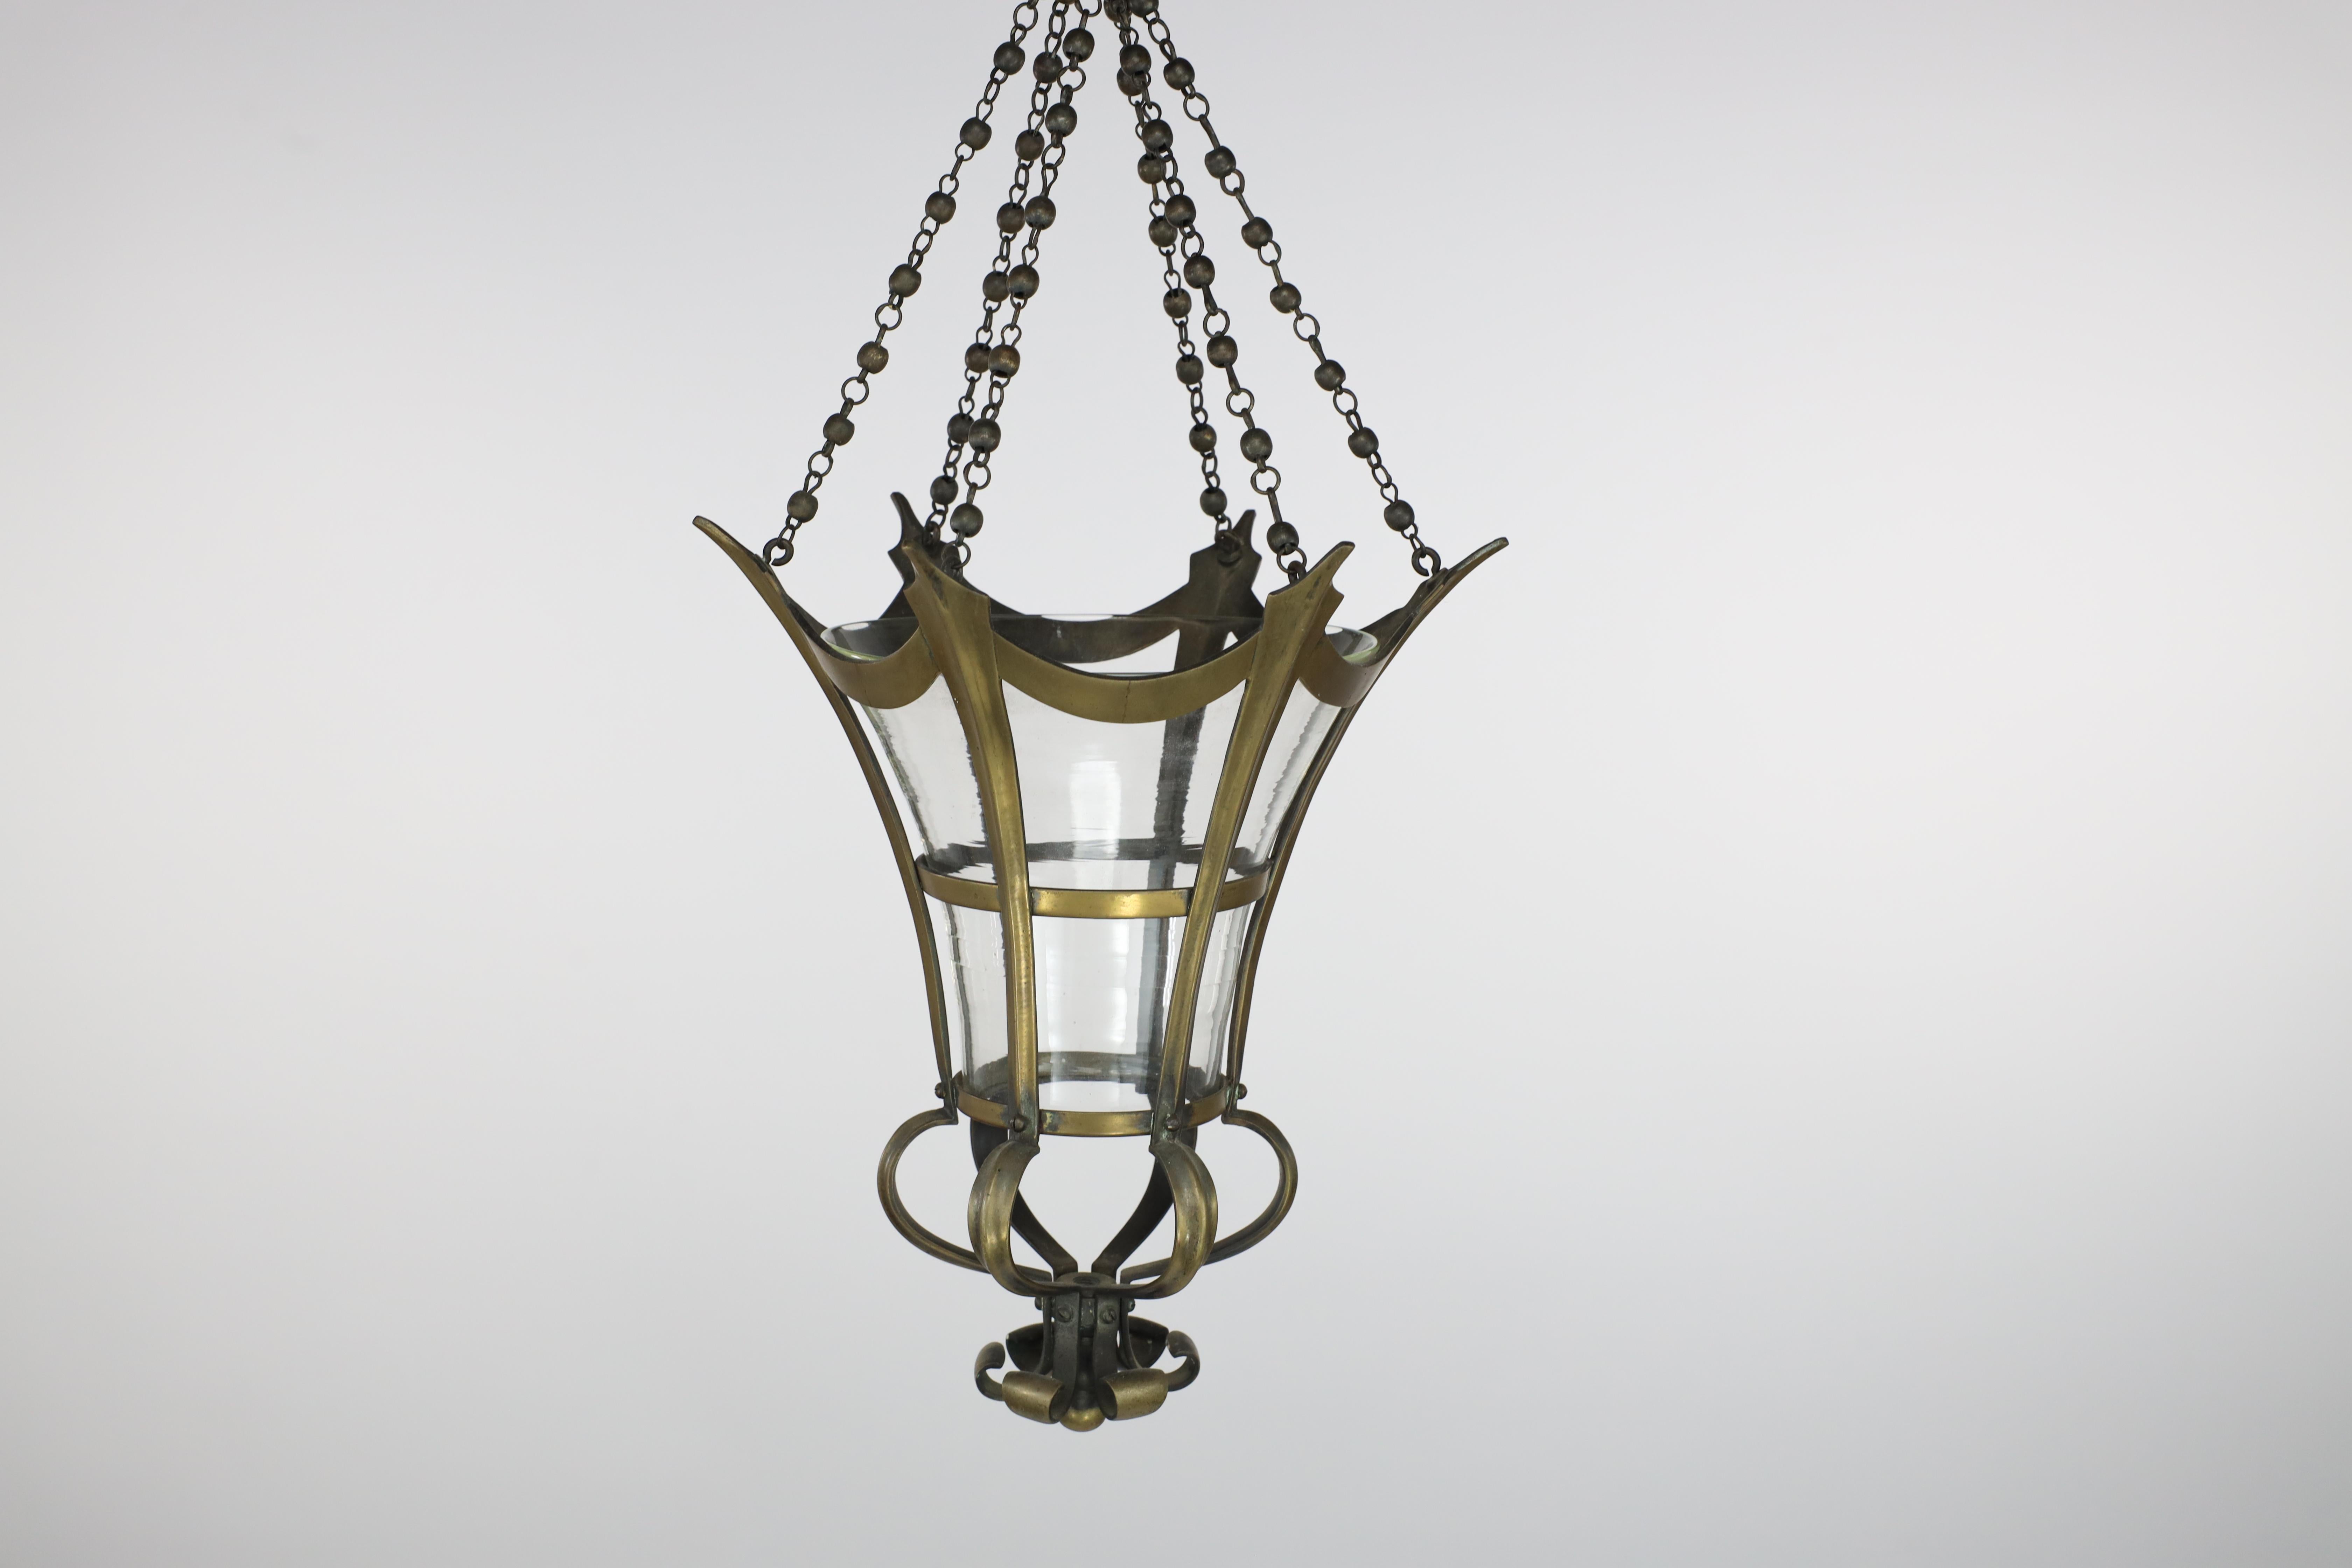 An Arts and Crafts brass hexagonal and conical-shaped lantern, with the original conical shade, each brass fluted side flows down and opens into a sphere and then unites into a flower at the base of the light. Retaining the original tiny ball and